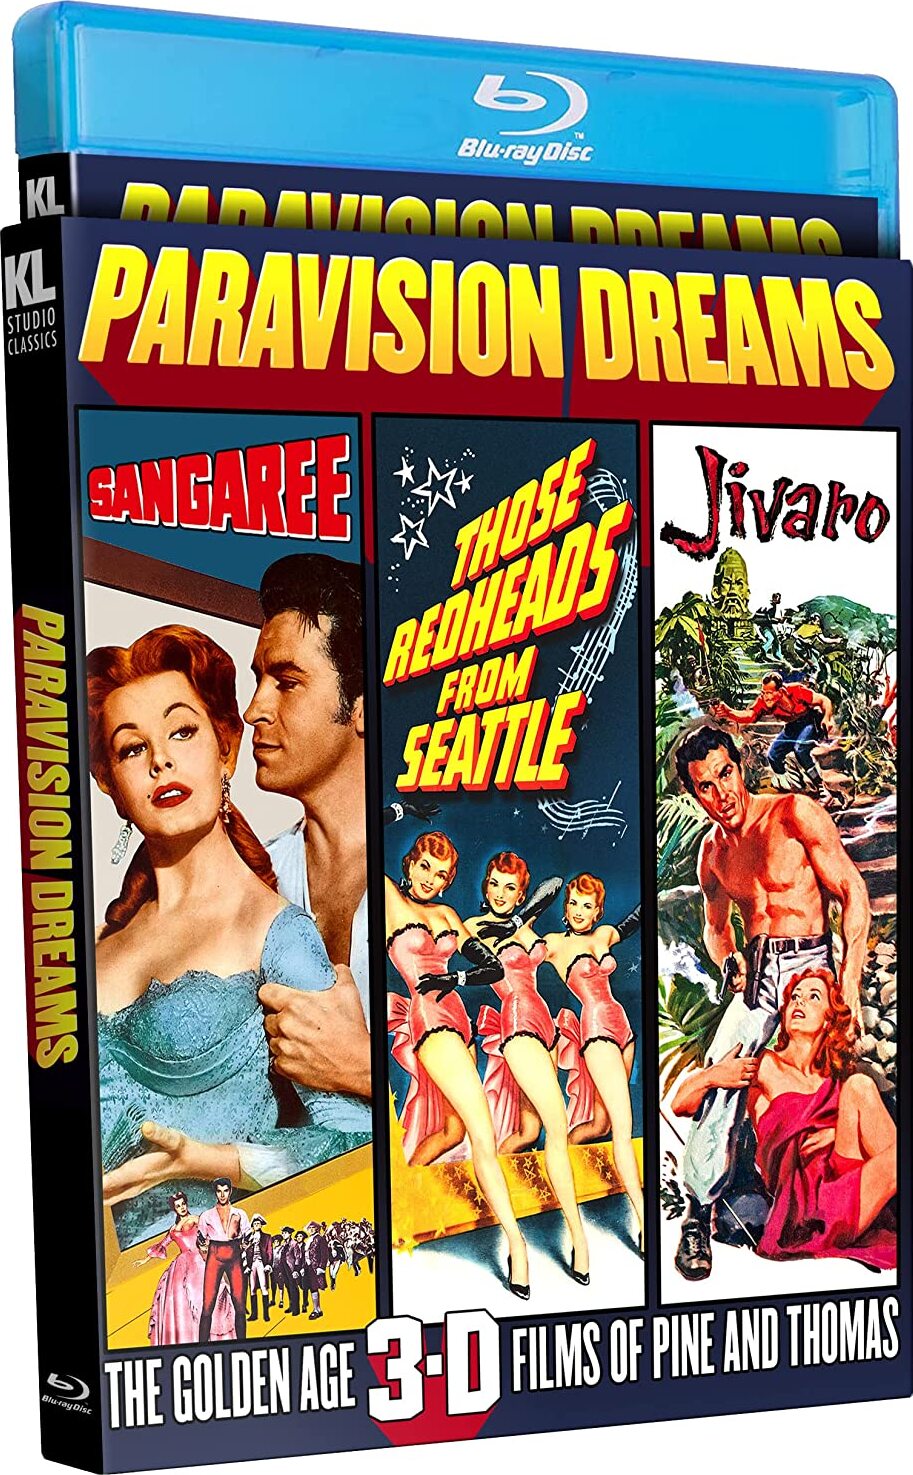 Paravision Dreams: The Golden Age 3-D Films of Pine and Thomas (1953-1954) de Edward Ludwig, Lewis R. Foster - front cover